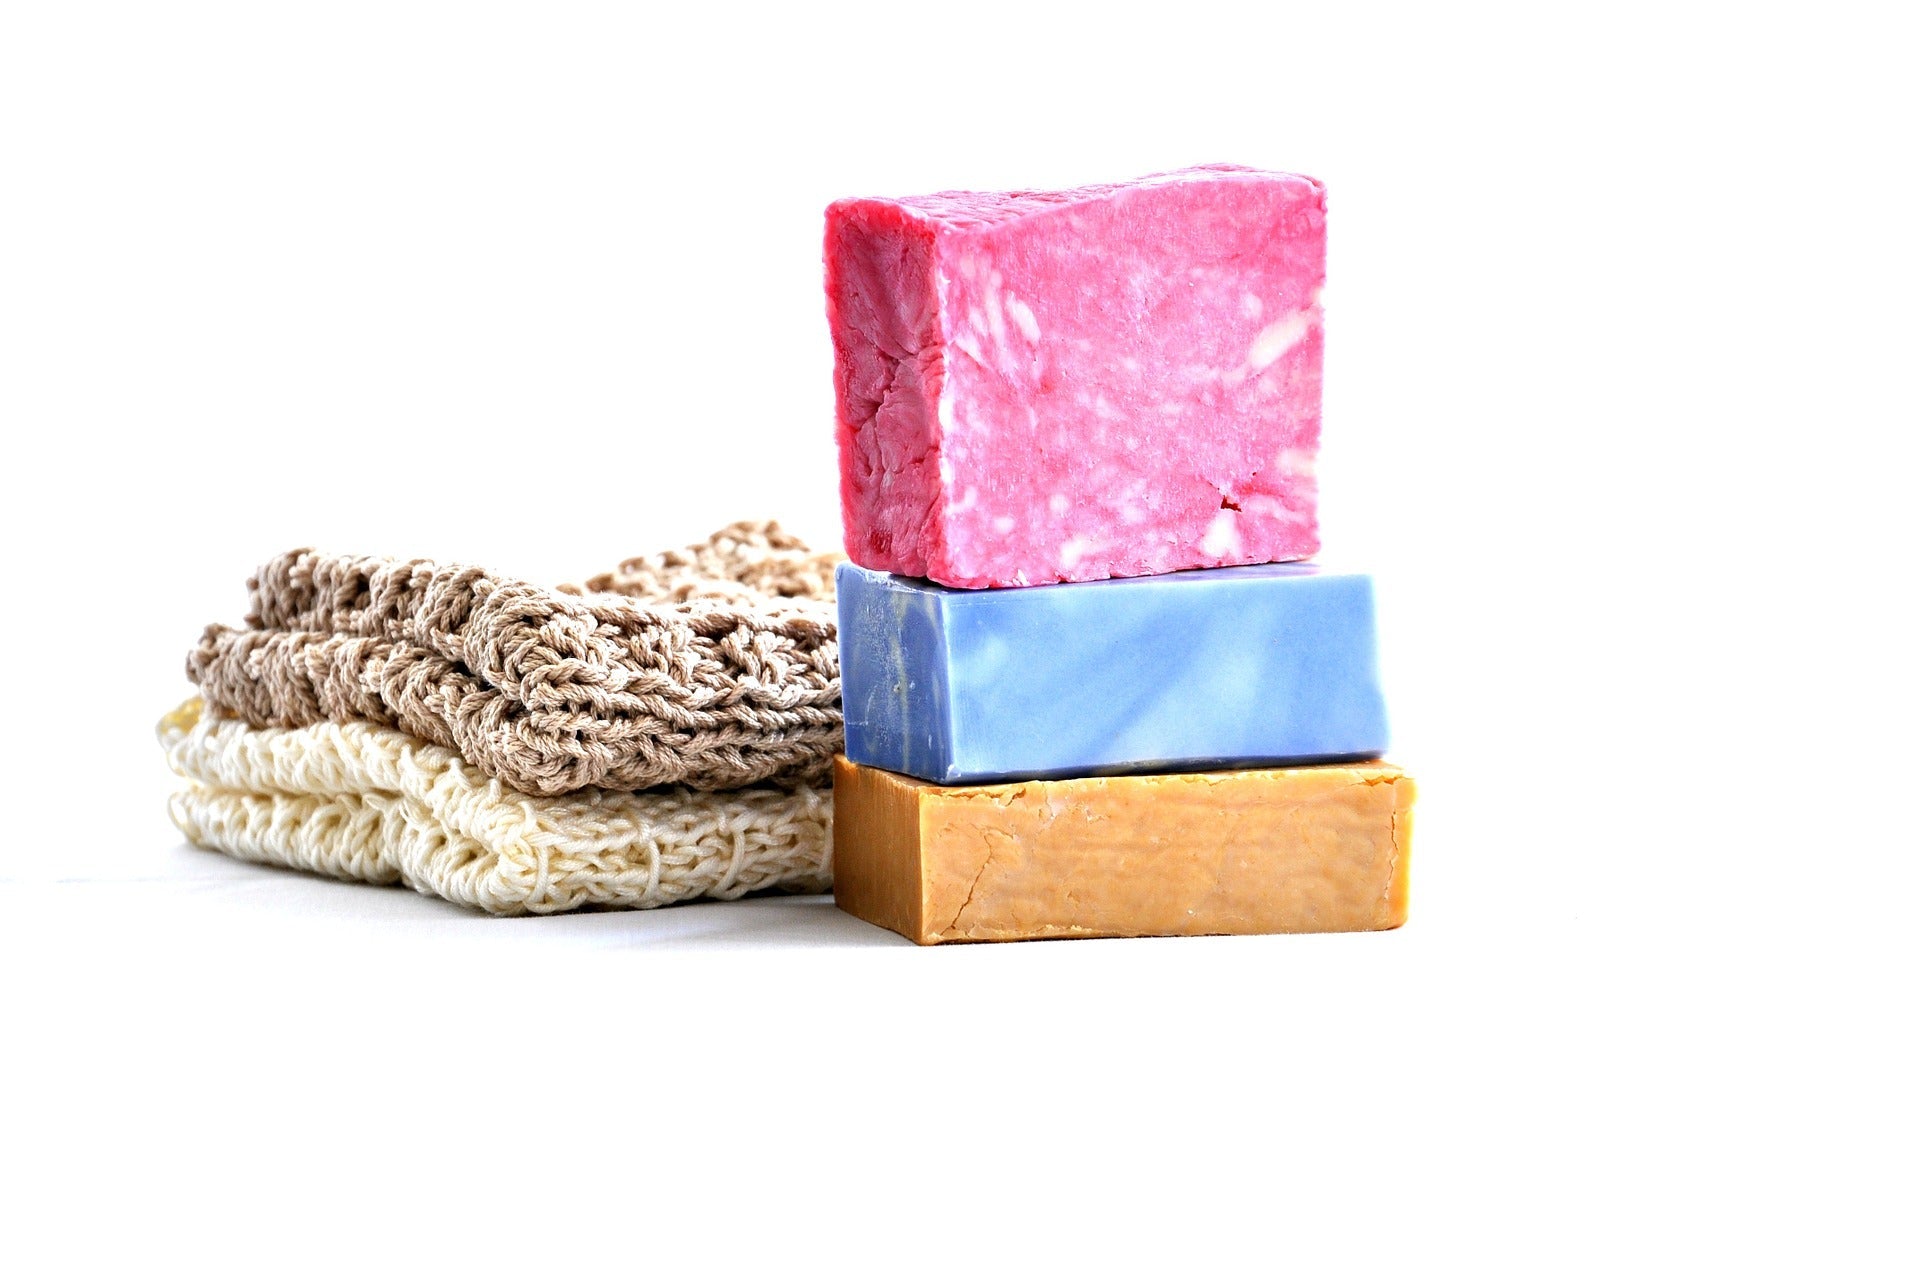 Soaps that have been handmade and smell Beautiful! We are a Premier urban lifestyle boutique featuring local artists and handmade goods. Online and In Store Women’s Fashion Boutique Located in North Port, Florida.